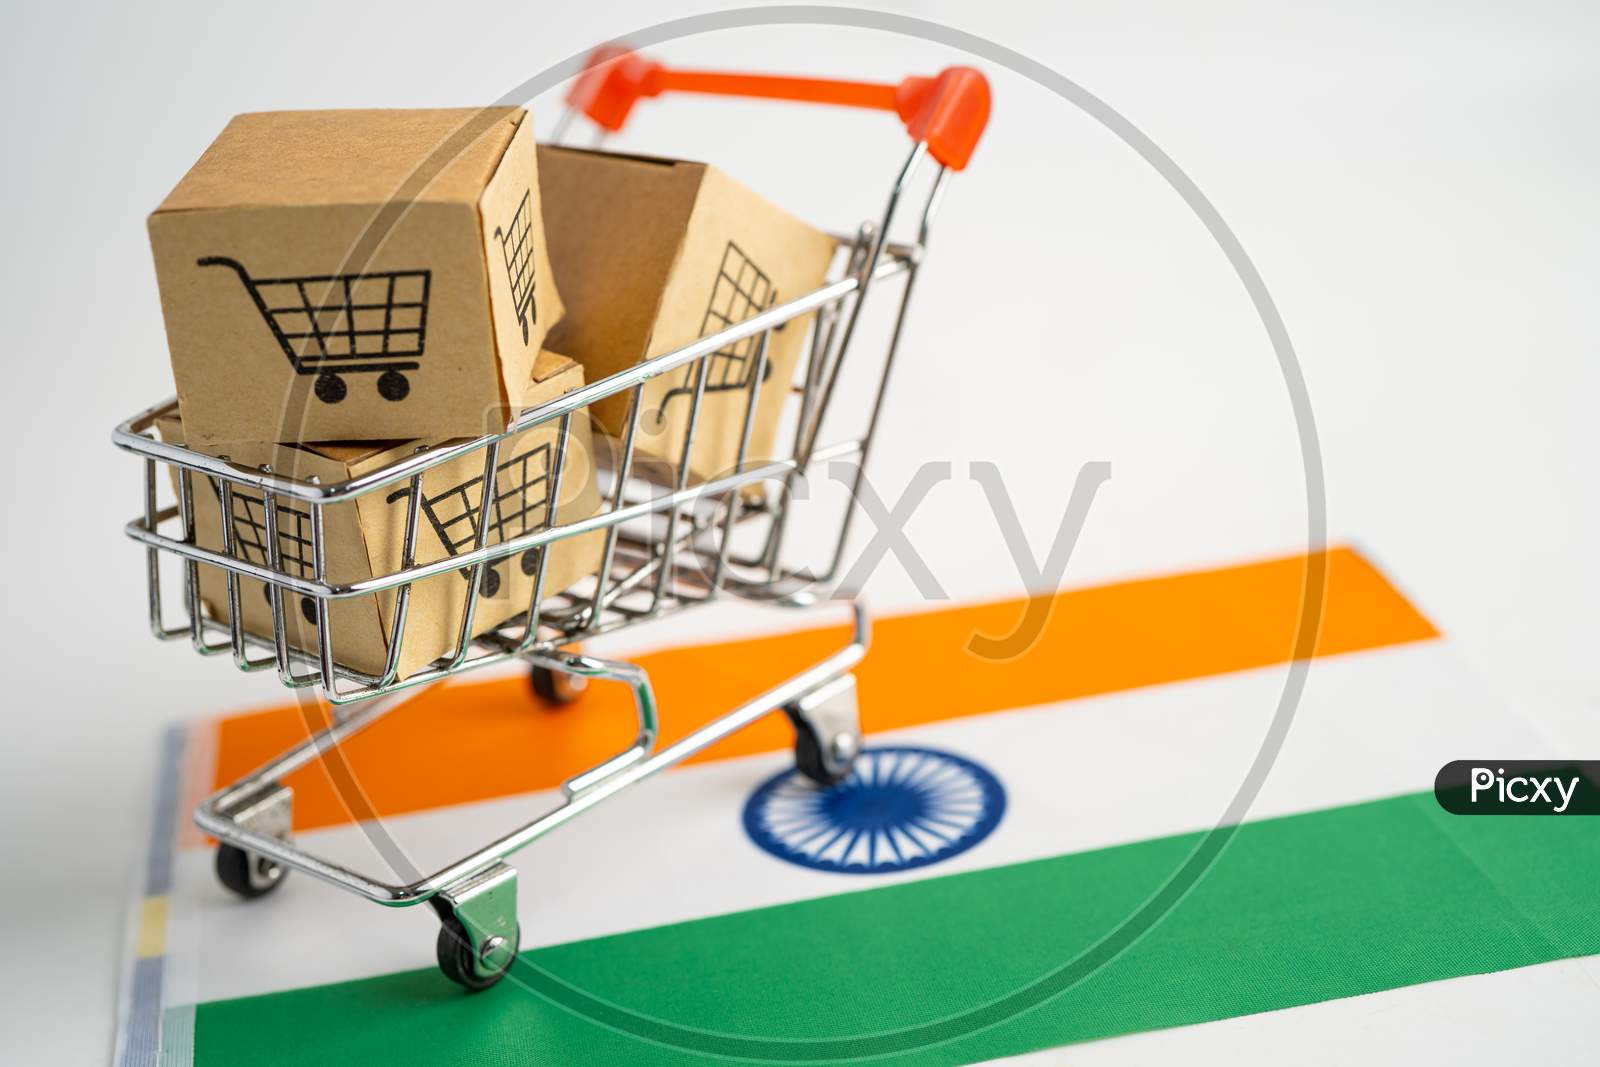 Box With Shopping Cart Logo And India Flag, Import Export Shopping Online Or Ecommerce Finance Delivery Service Store Product Shipping, Trade, Supplier Concept.